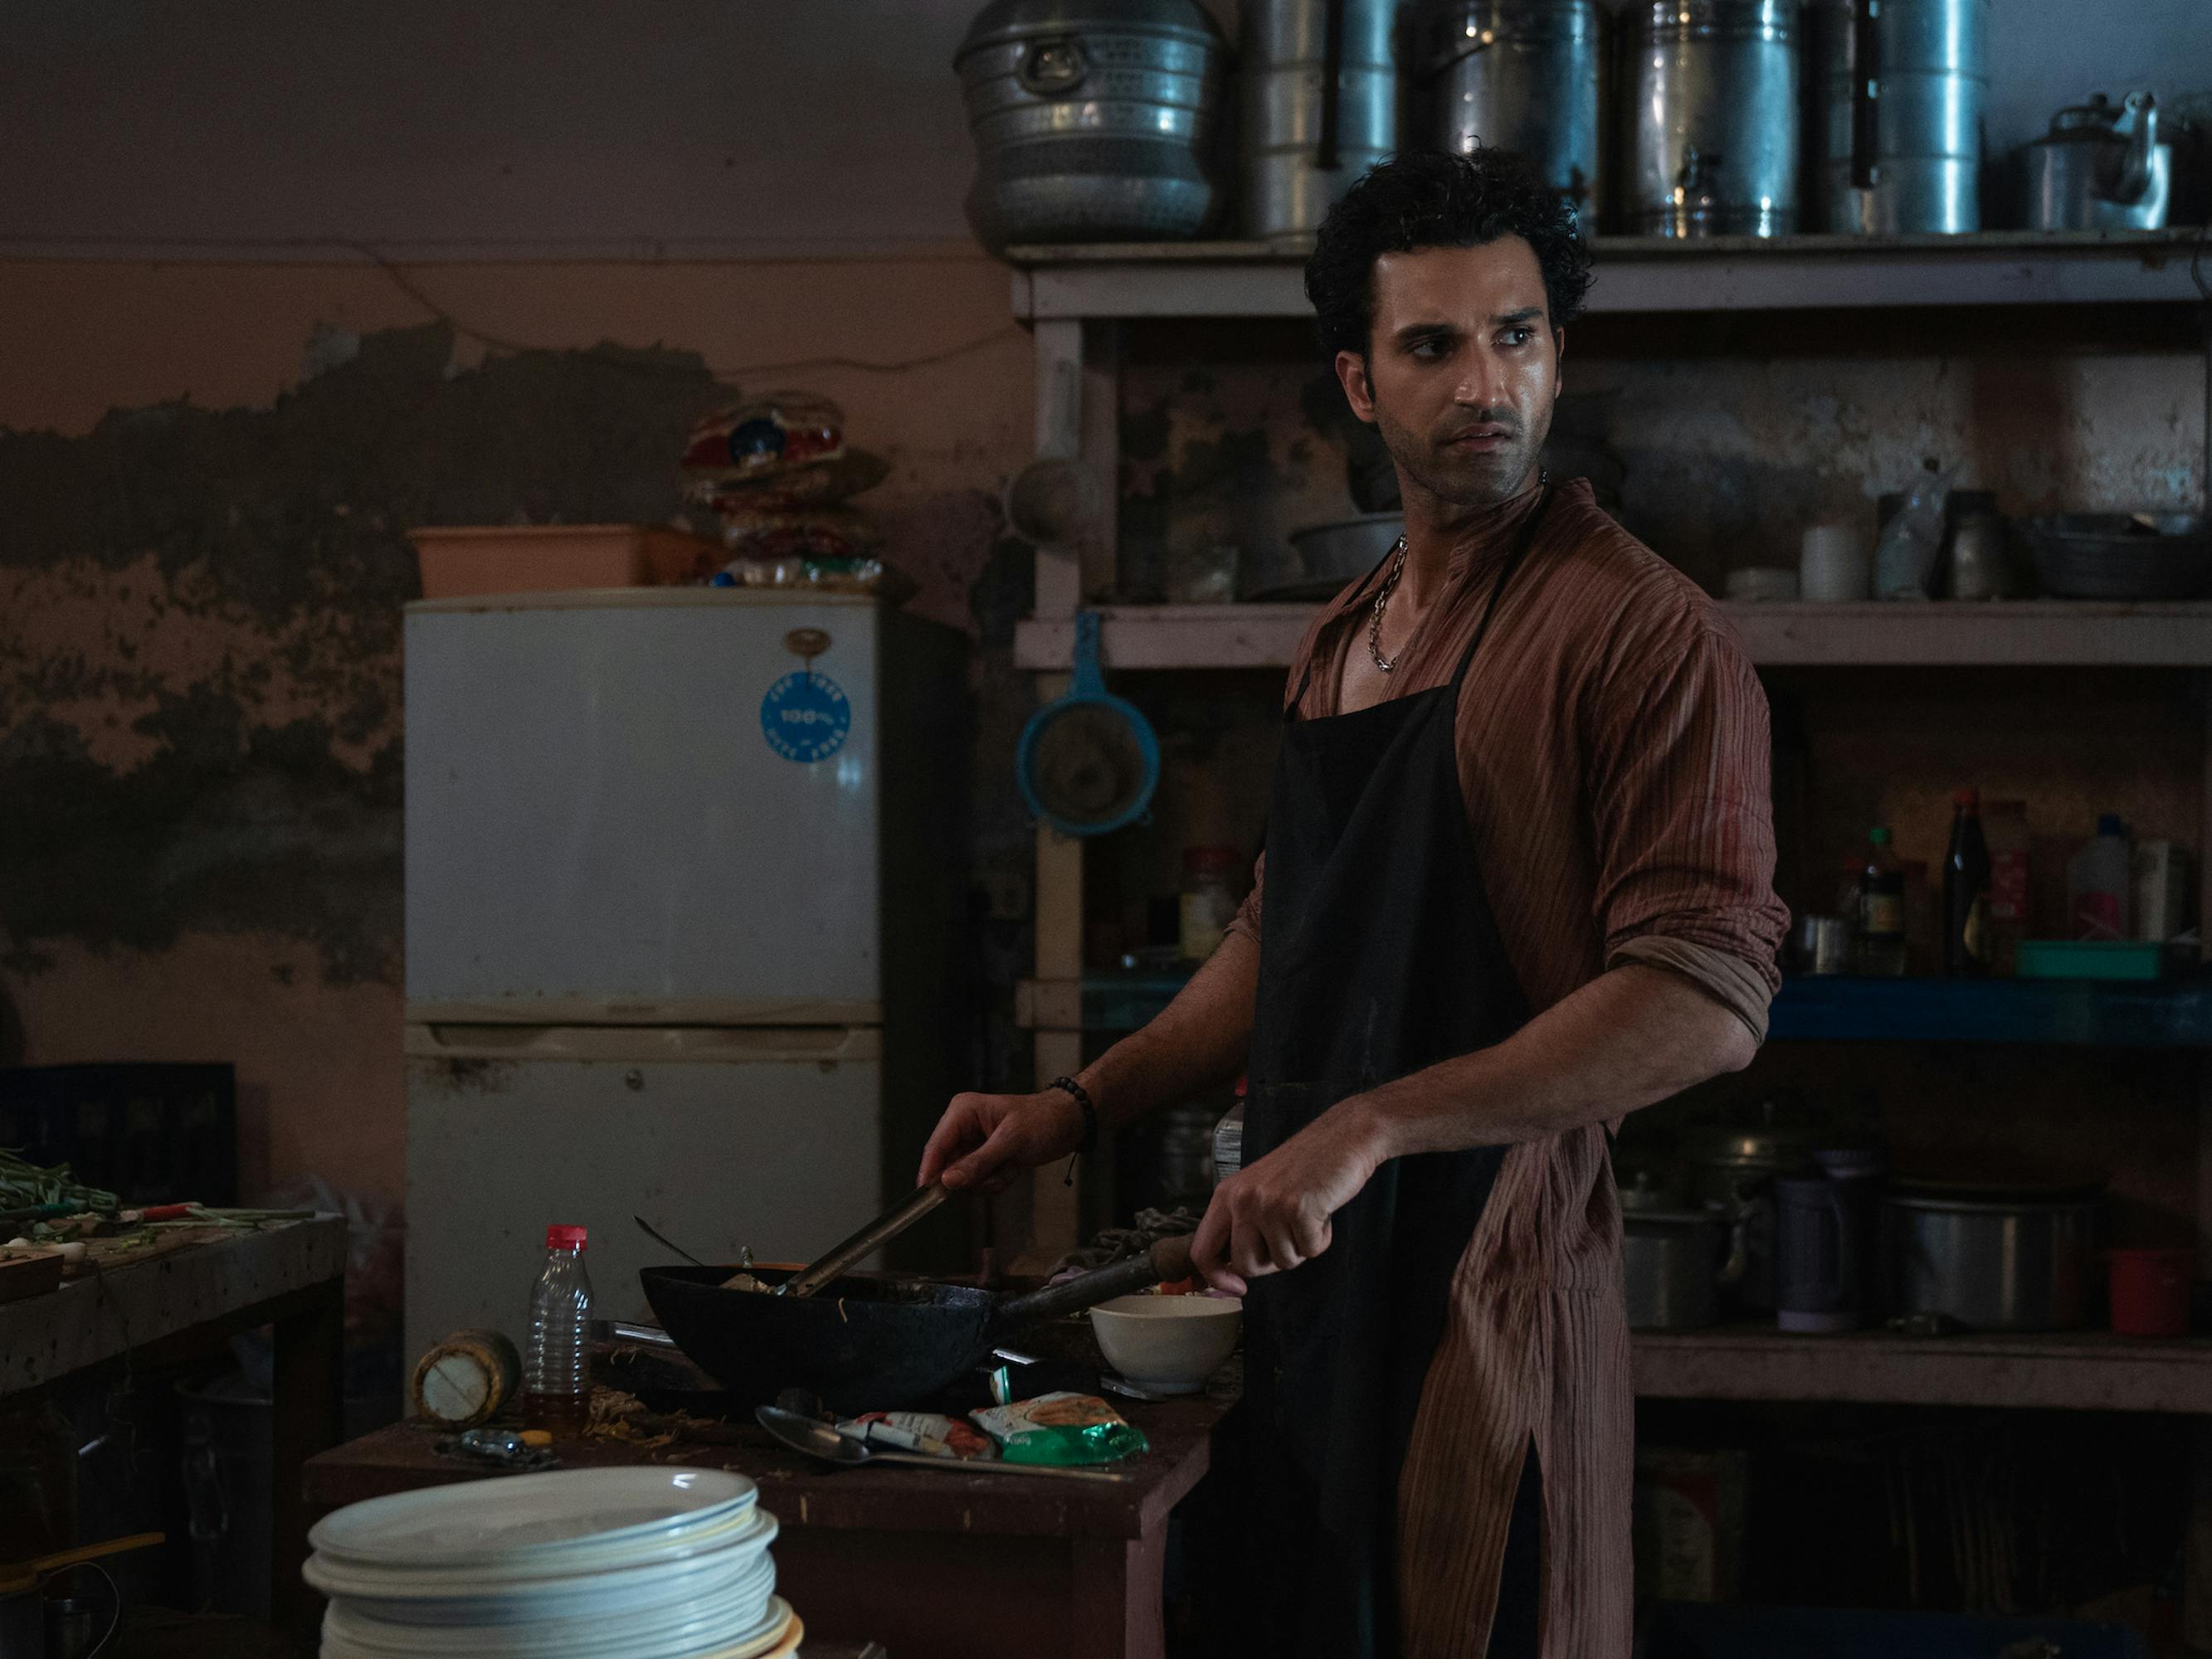 Neeraj (Gurfateh Pirzada) wears a brown shirt and black apron, and cooks in a dark kitchen.